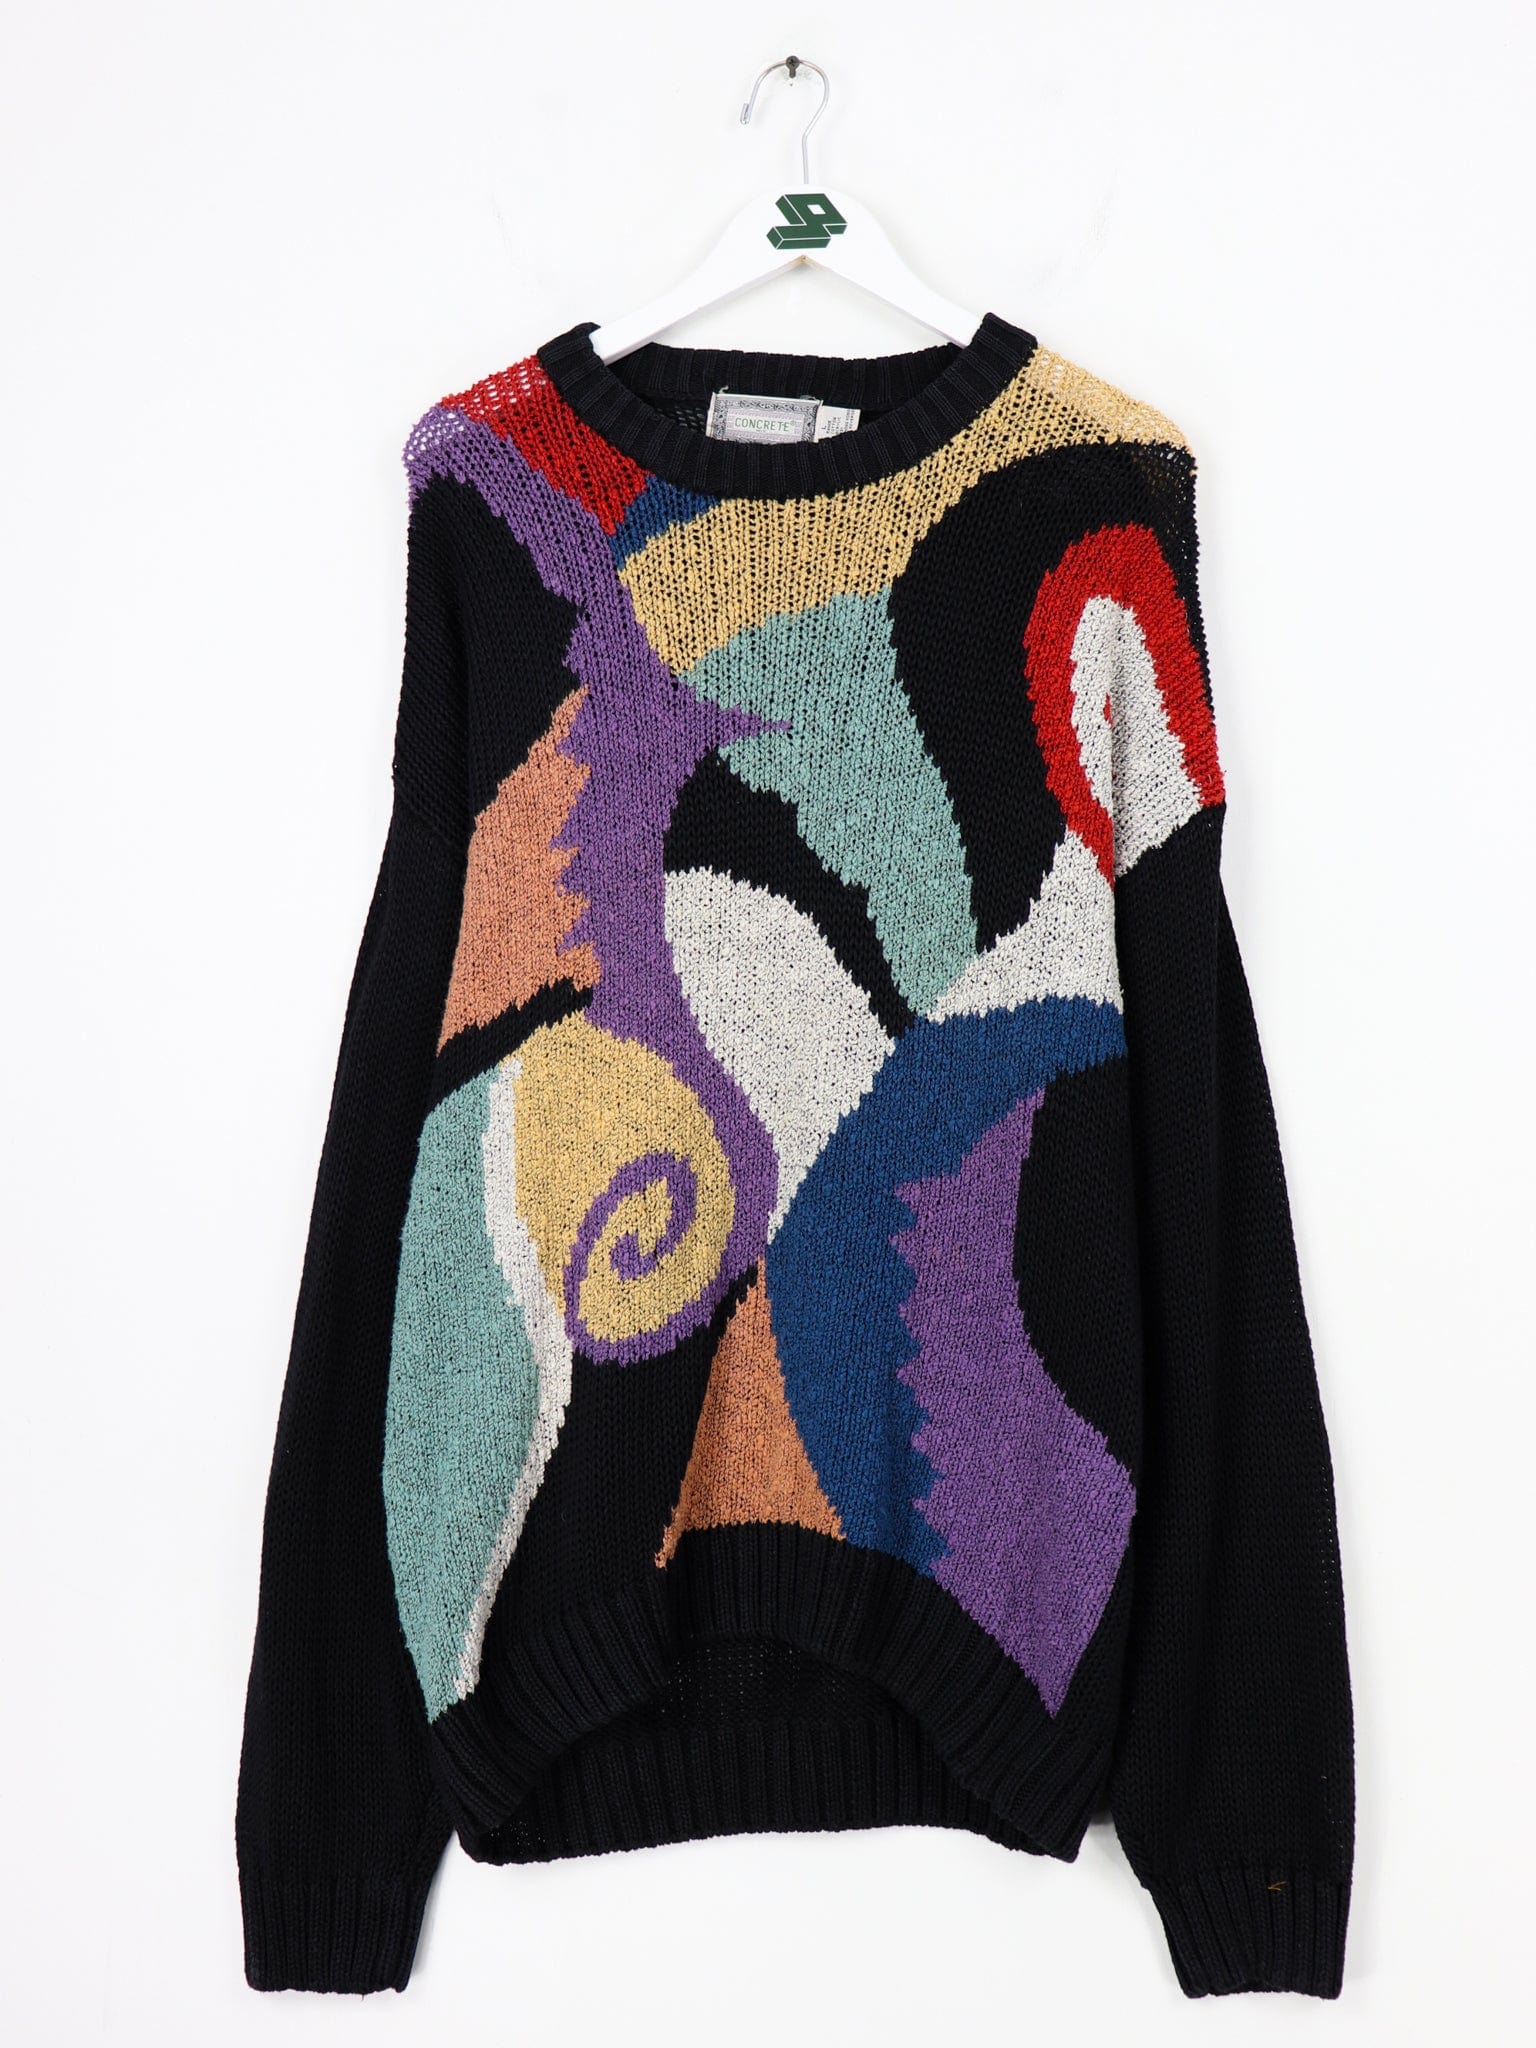 Vintage Concrete Abstract Knit Sweater Size Large Fits Long